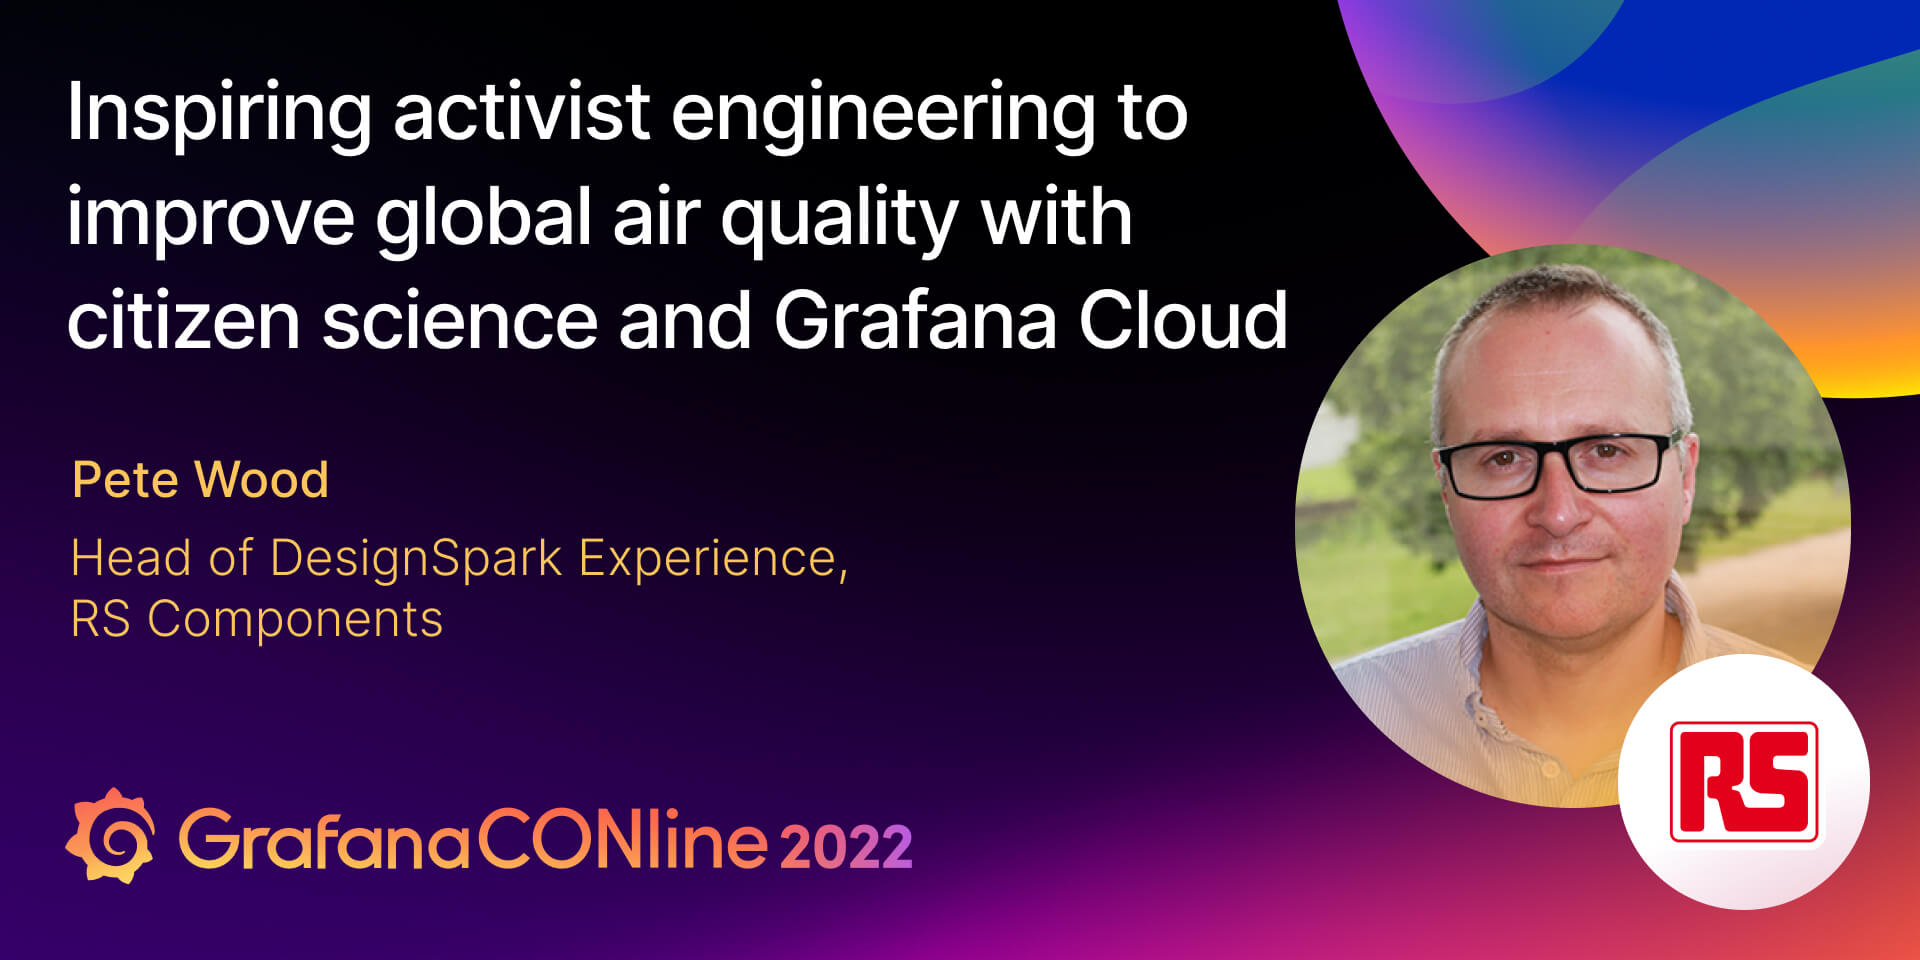 Inspiring activist engineering to improve global air quality with citizen science and Grafana Cloud